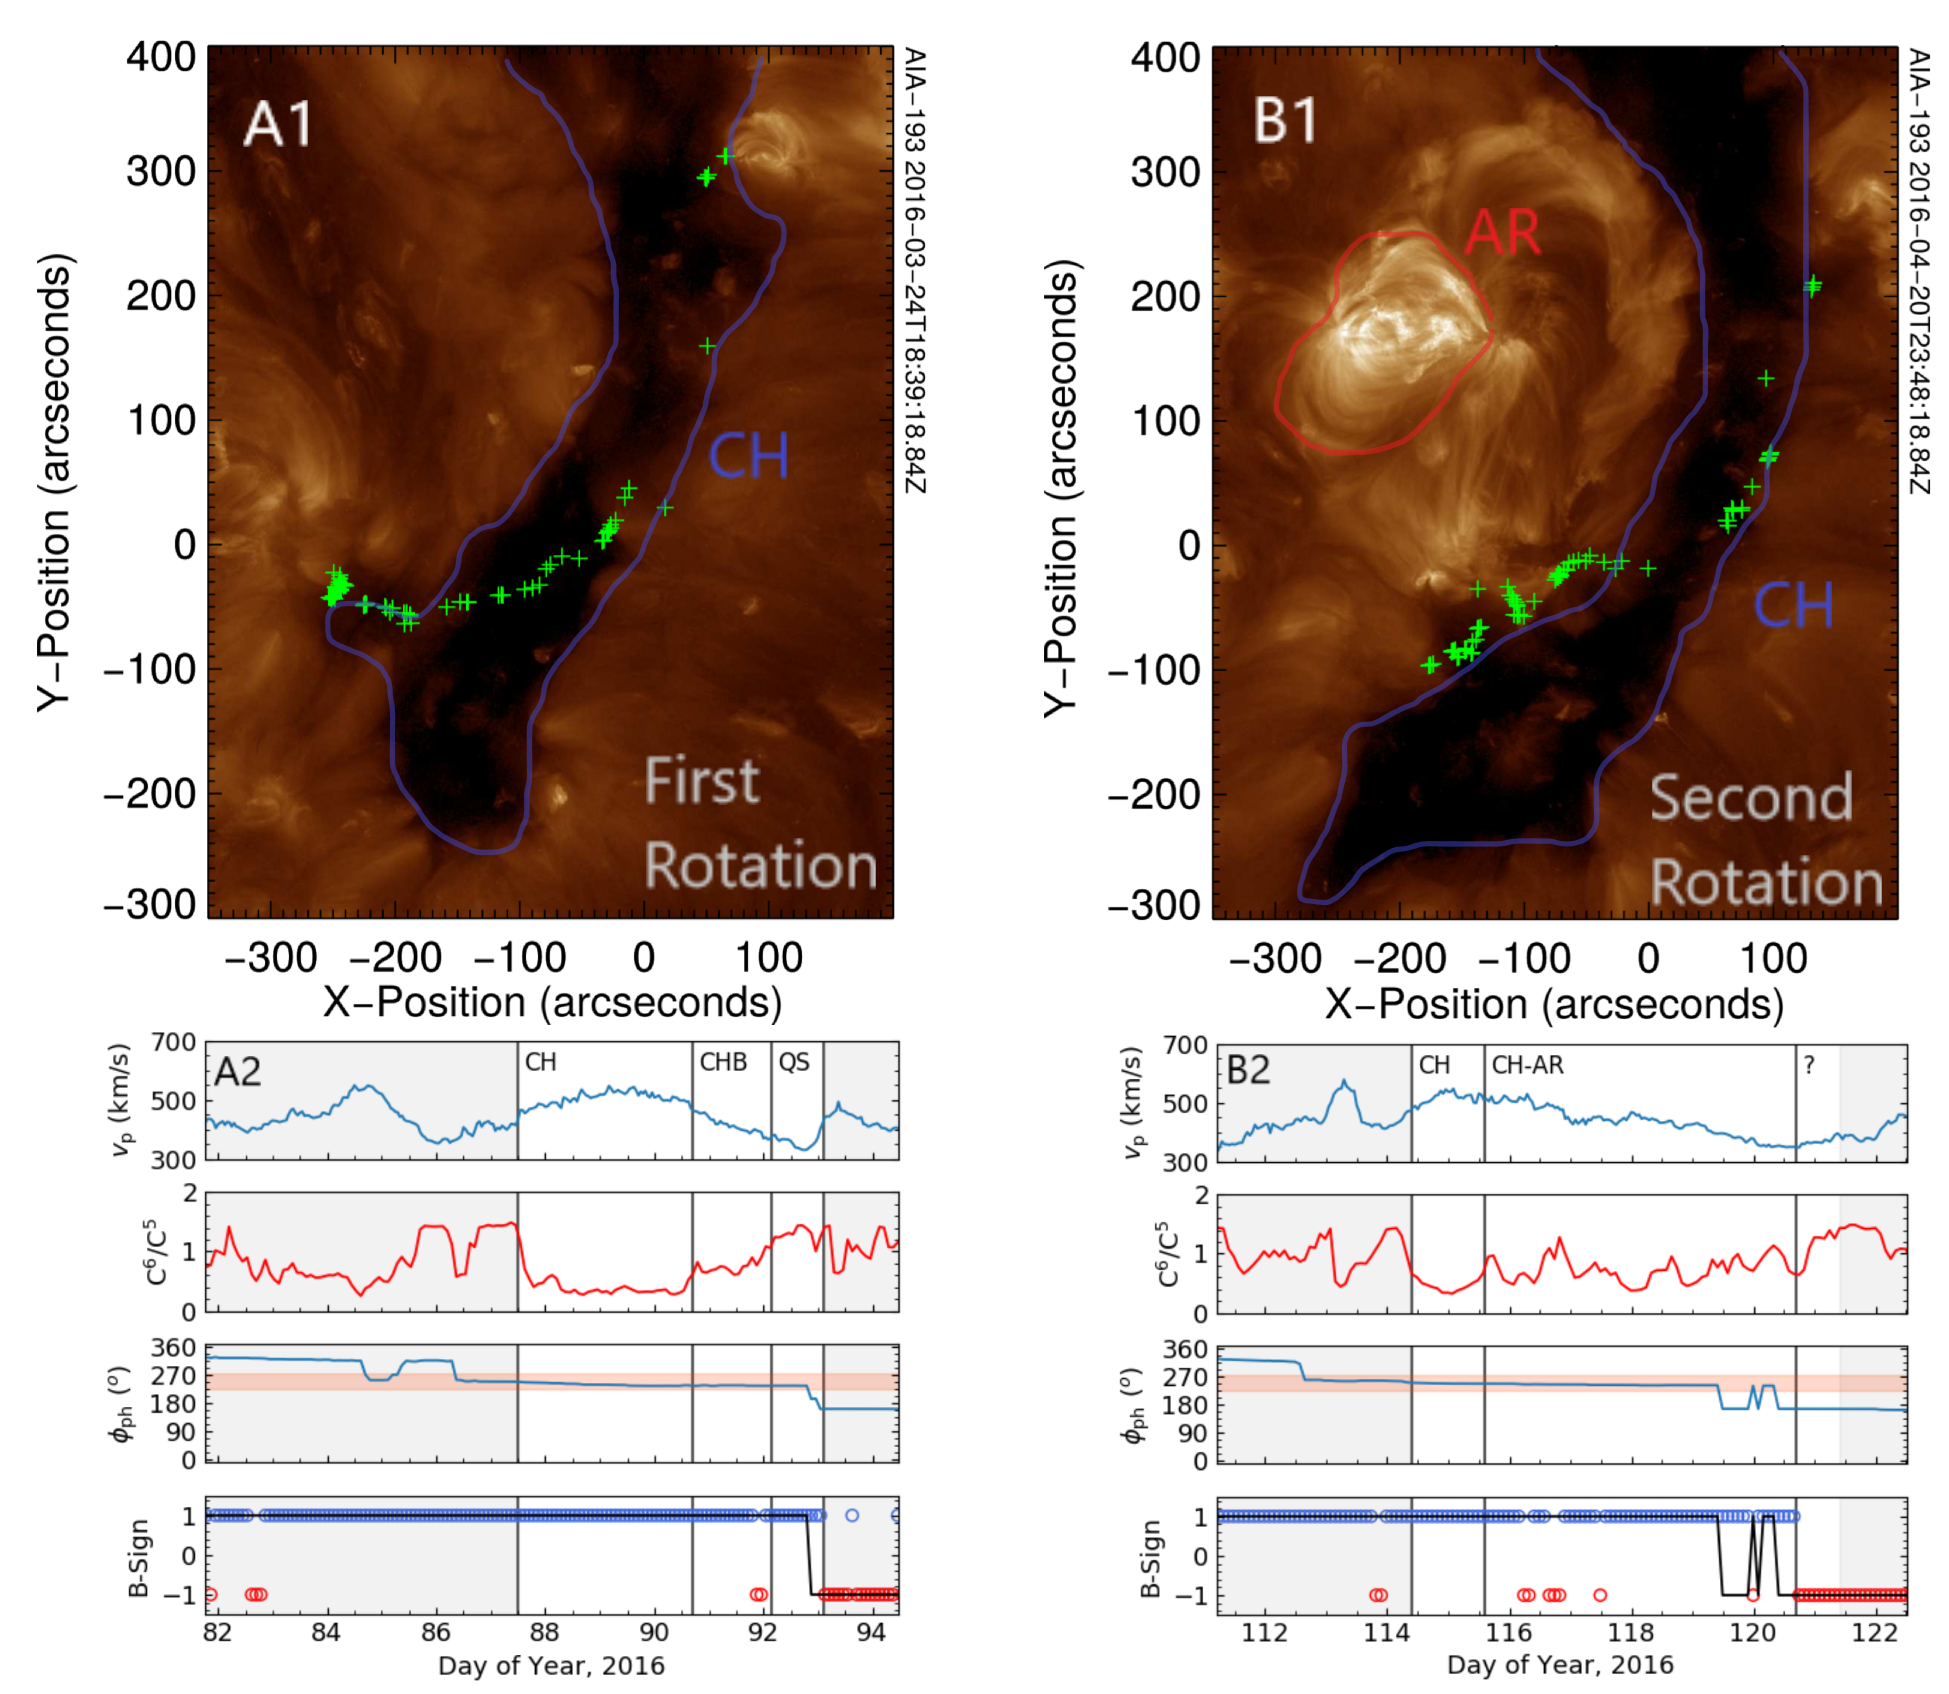 Solar images of the coronal hole alongside time series of solar wind properties.